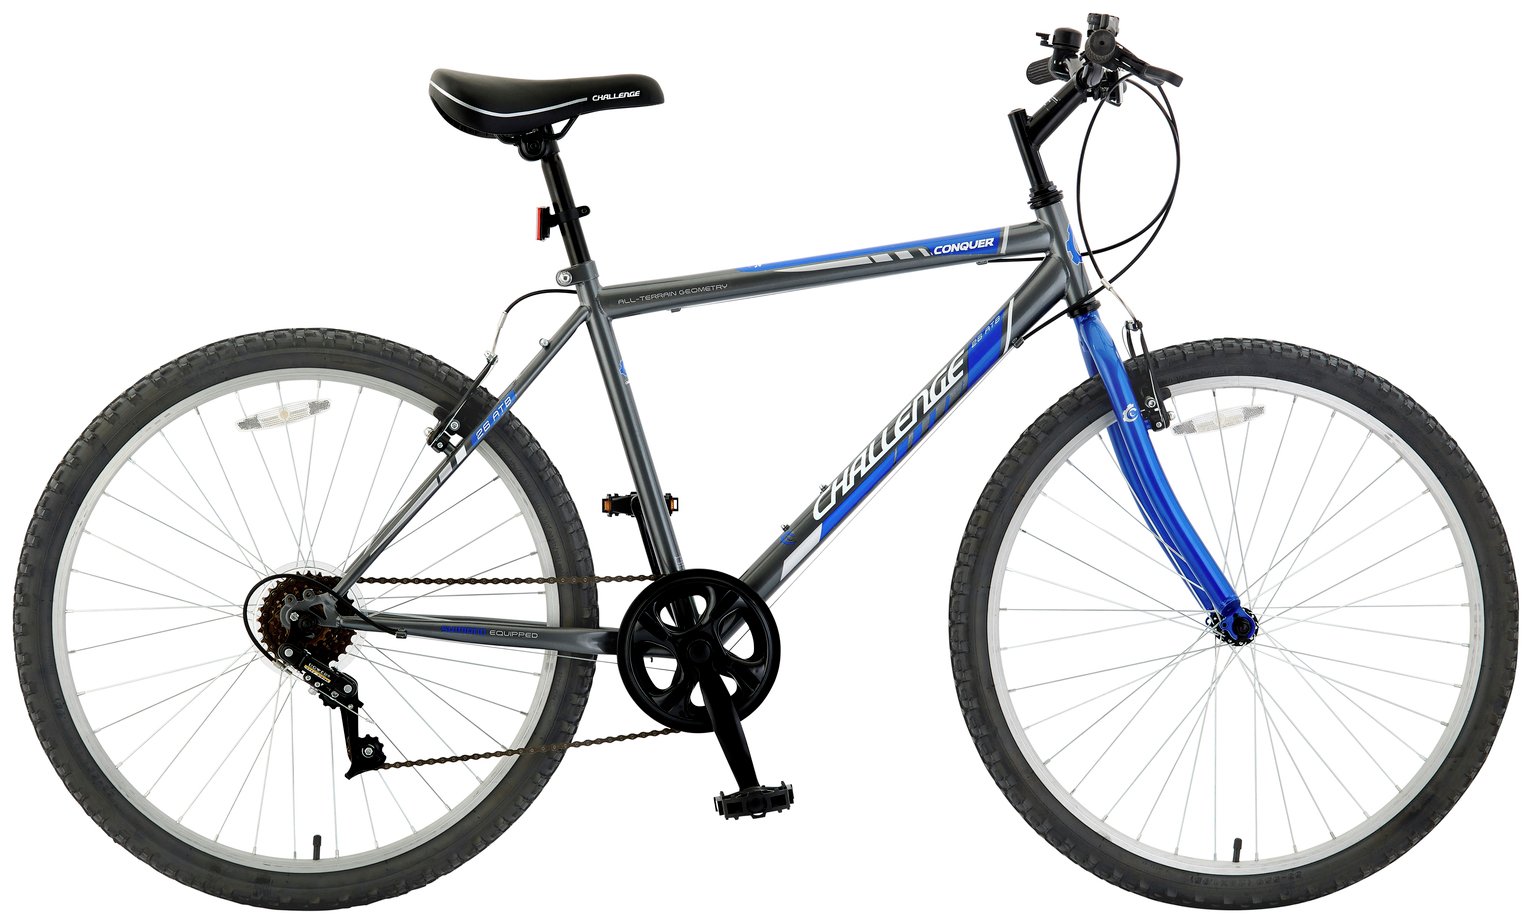 gents mountain bikes for sale